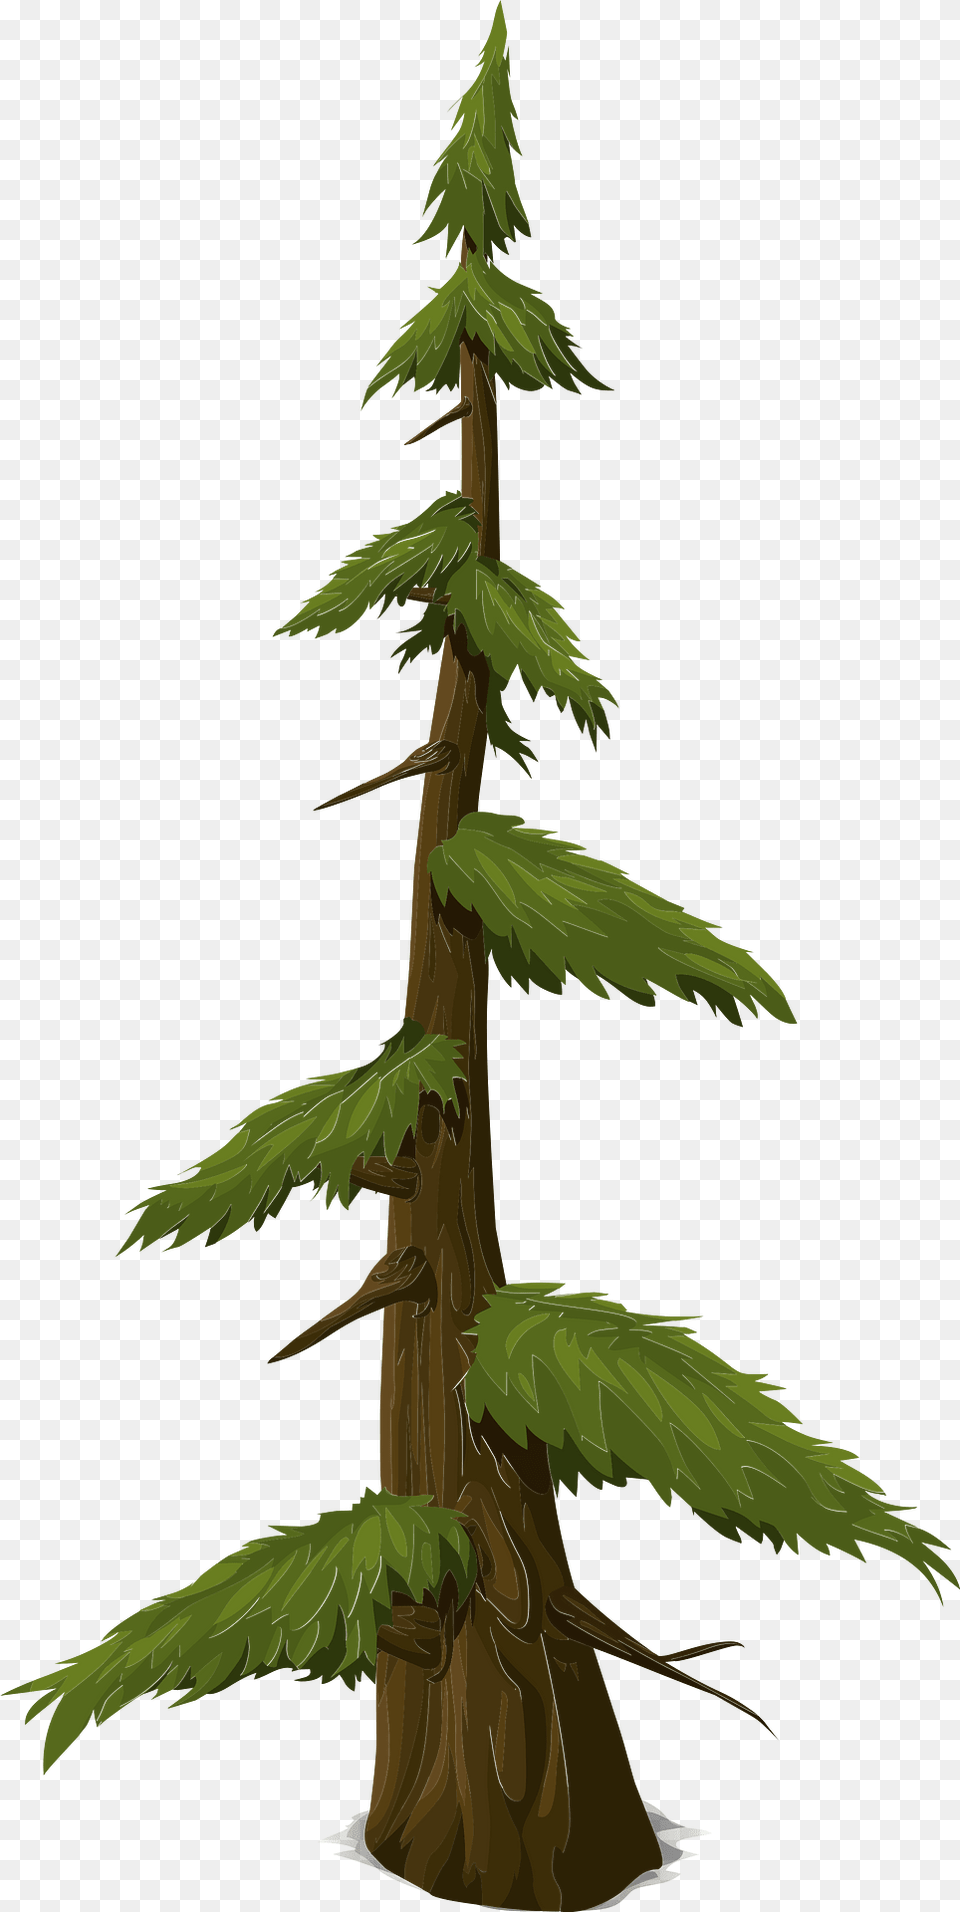 Green Coniferous Tree Clipart, Conifer, Fir, Pine, Plant Png Image